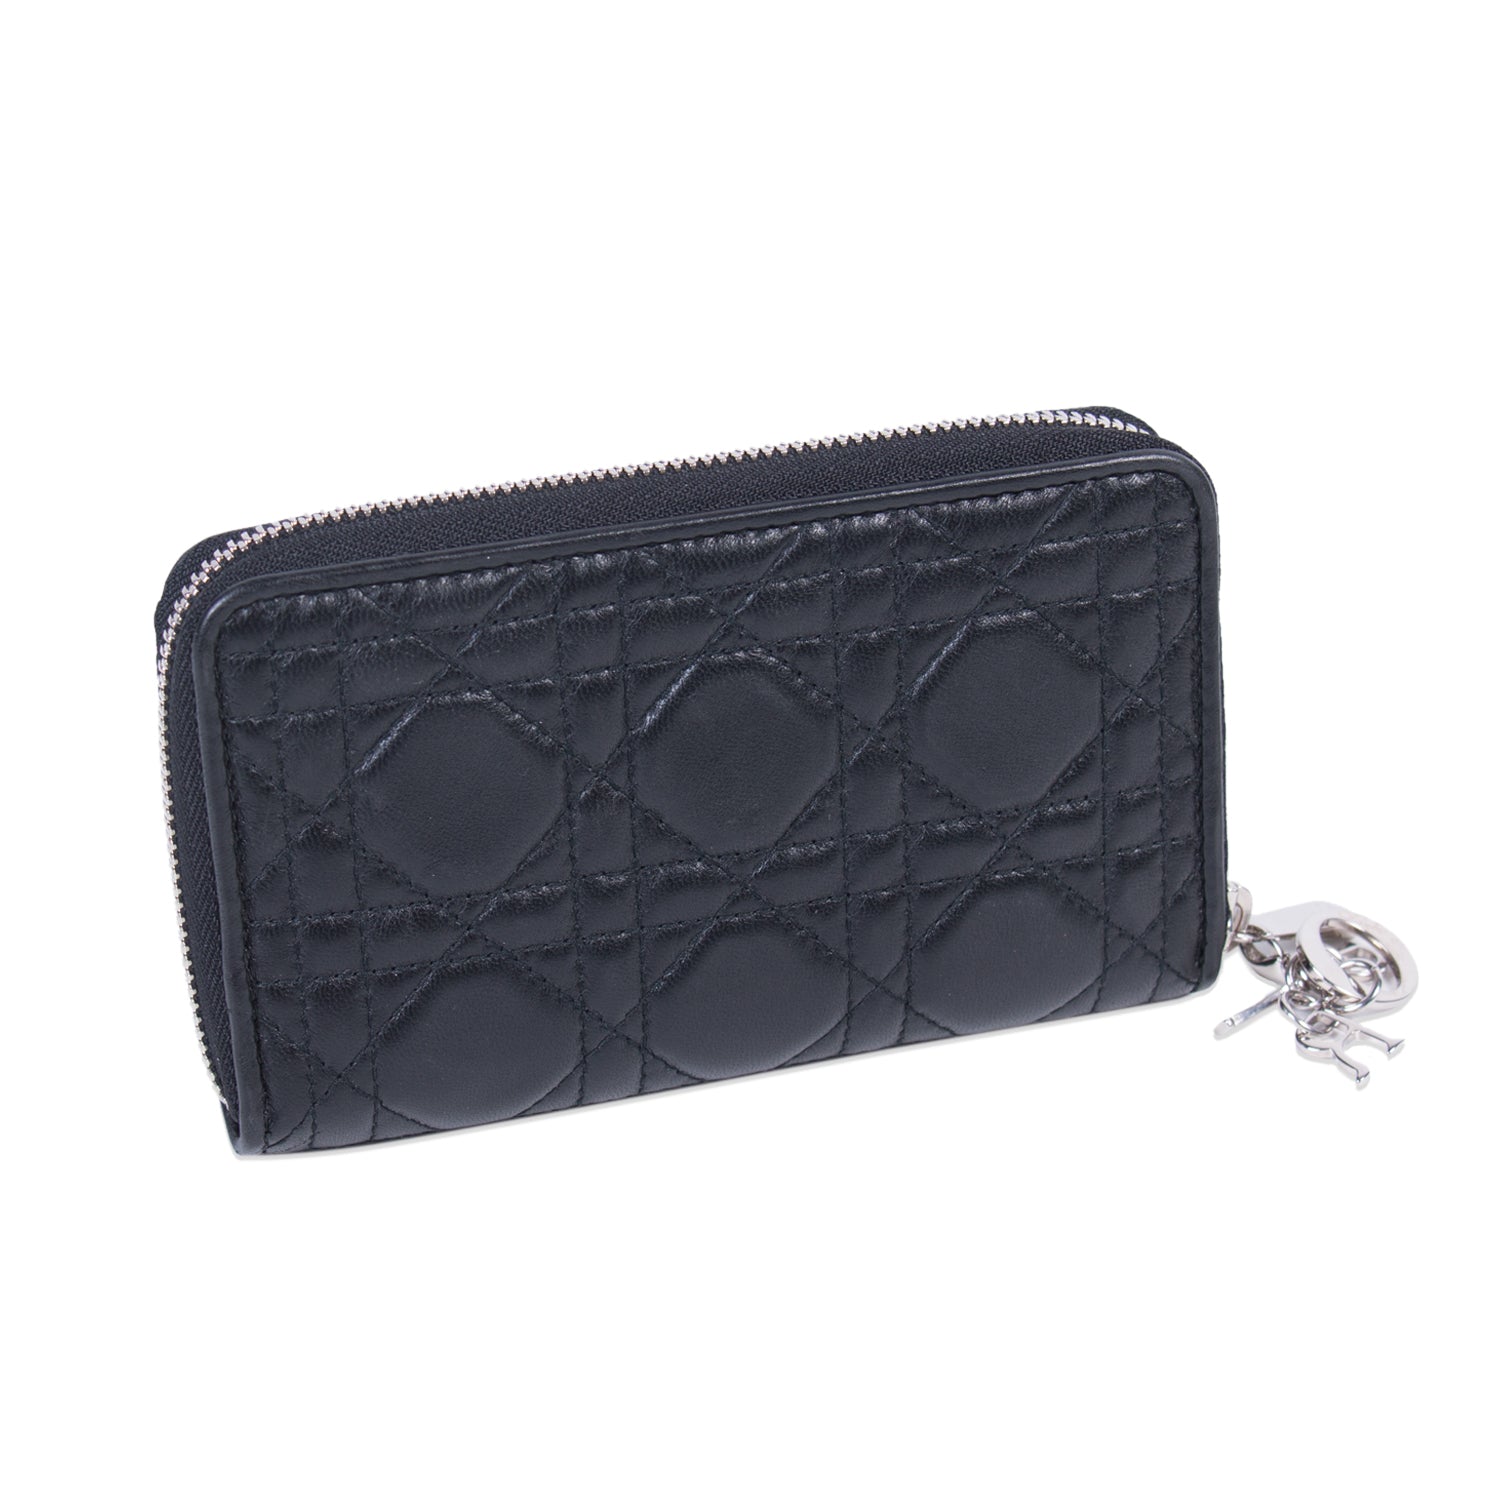 Shop authentic Christian Dior Lady Dior Continental Wallet at revogue ...